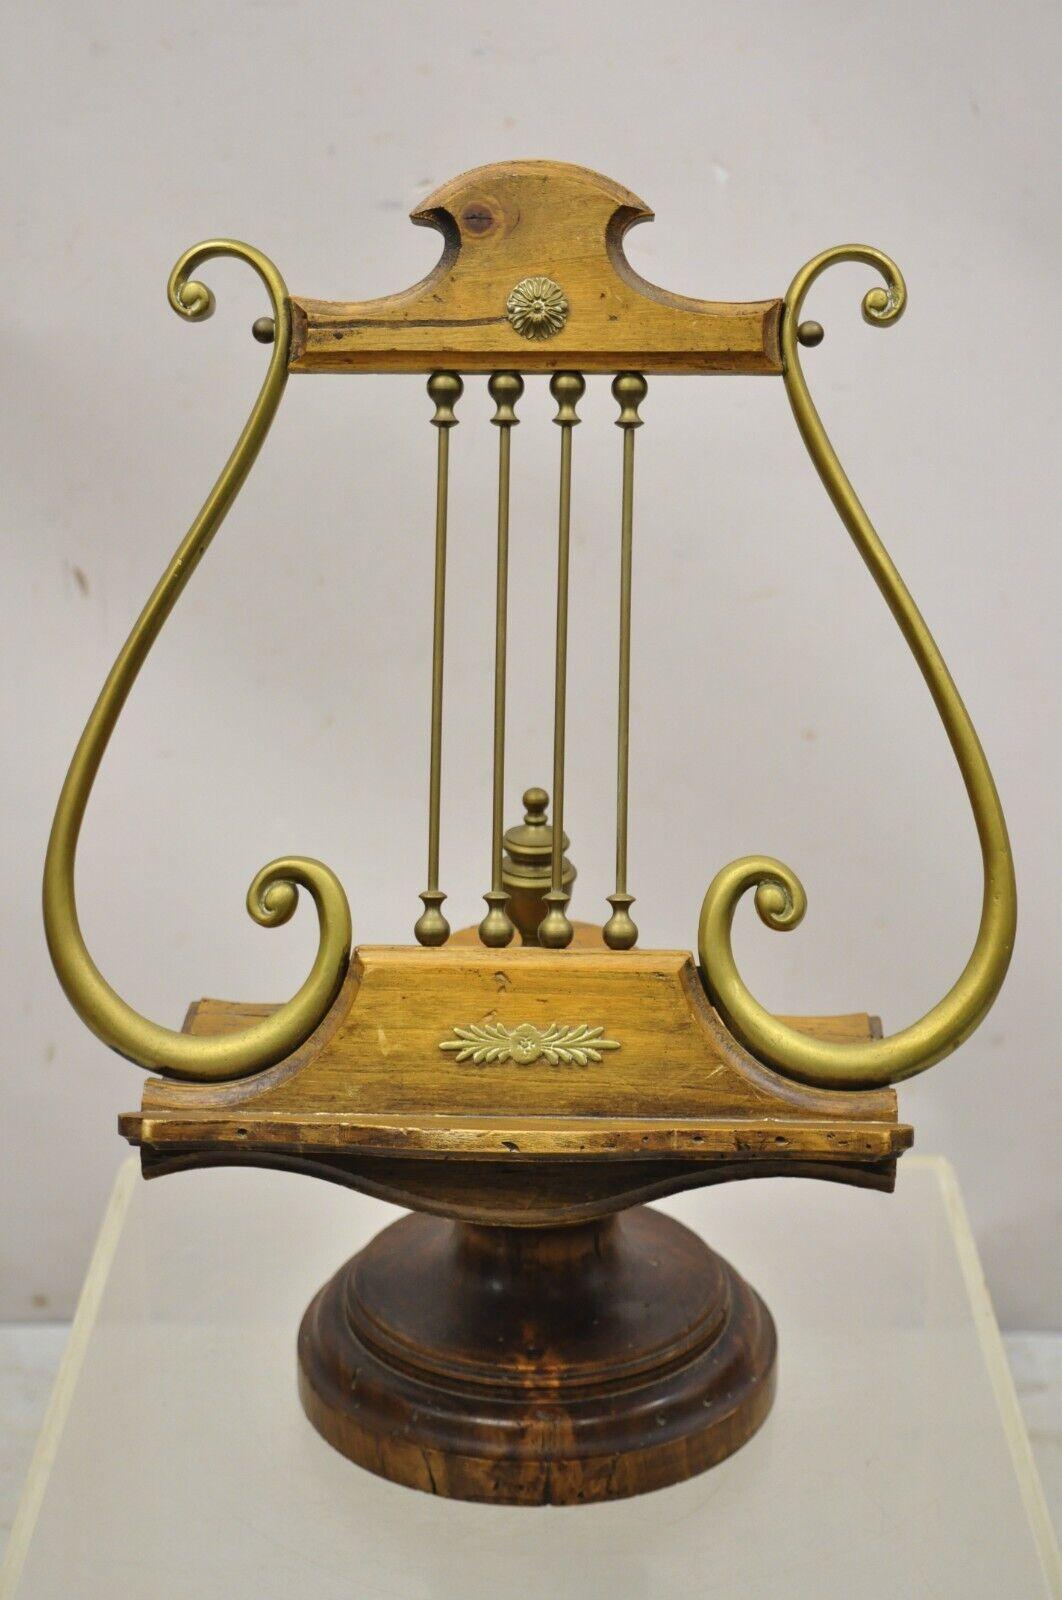 Vintage Italian Regency Wood and Brass Lyre Harp Music Stand. Item features solid brass accents, distressed finish, quality Italian craftsmanship, stamped 